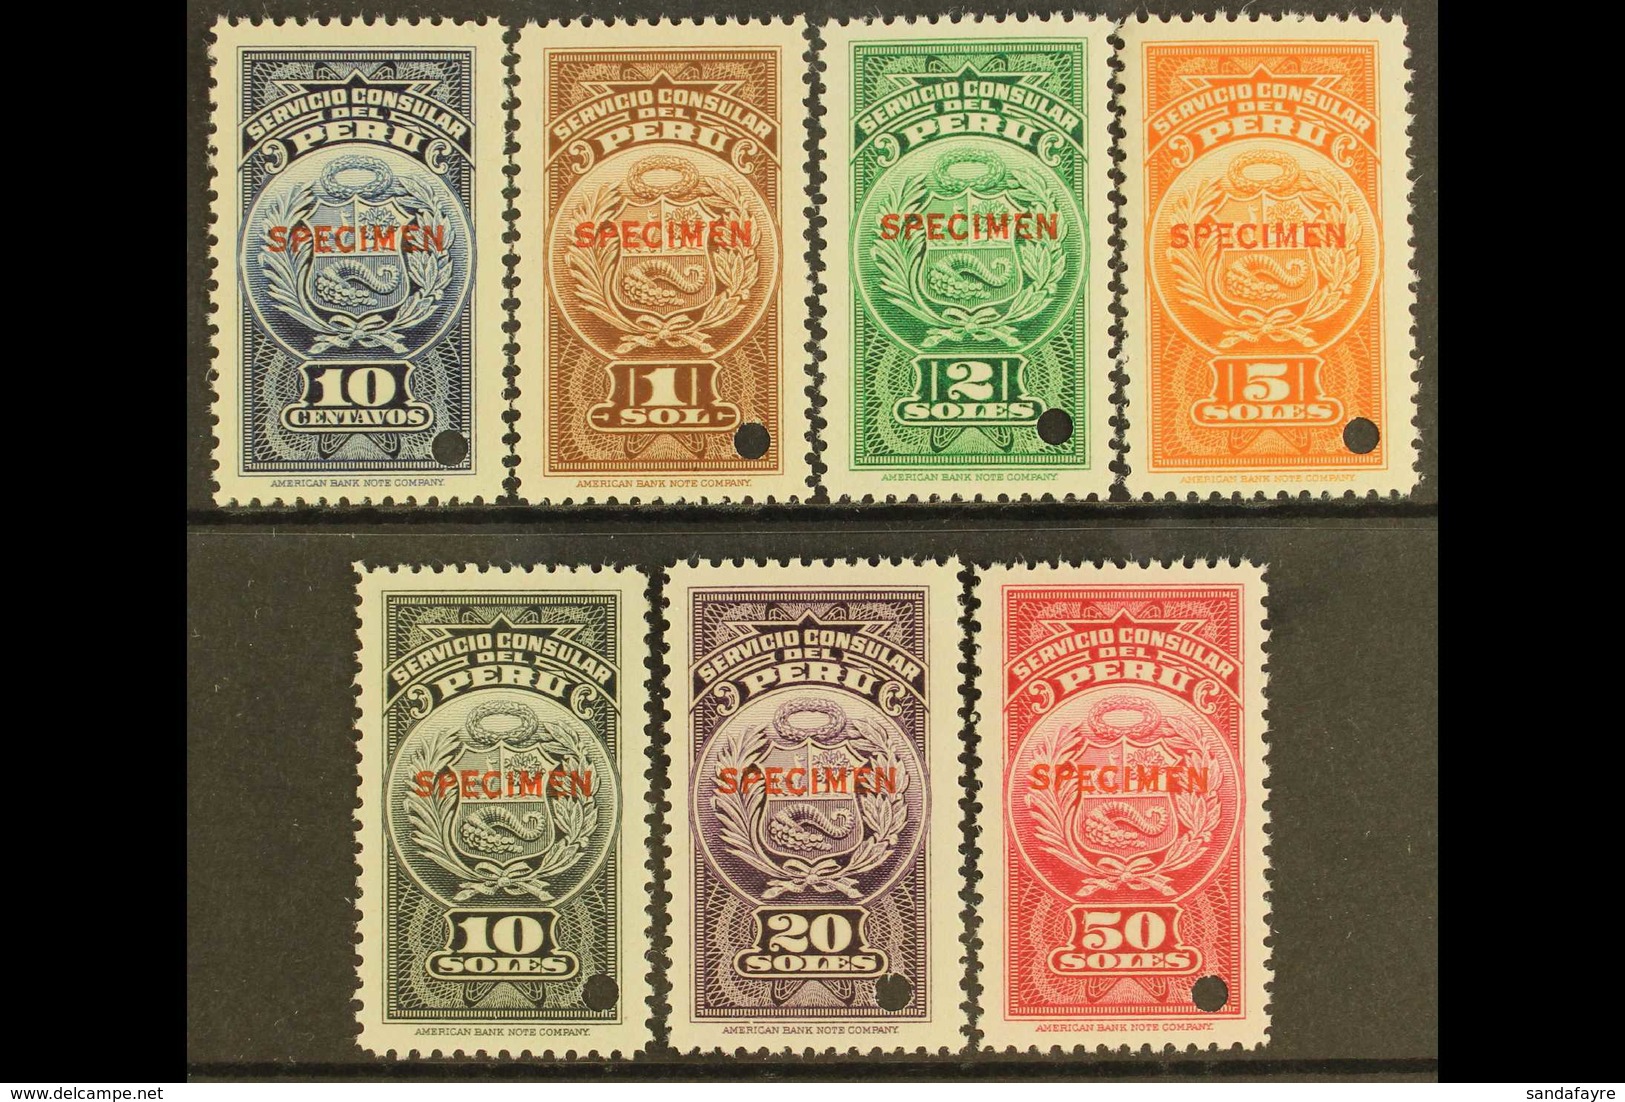 CONSULAR REVENUES 1938 Complete Set With "SPECIMEN" Overprints, Very Fine Never Hinged Mint, With Small Security Punch-h - Pérou